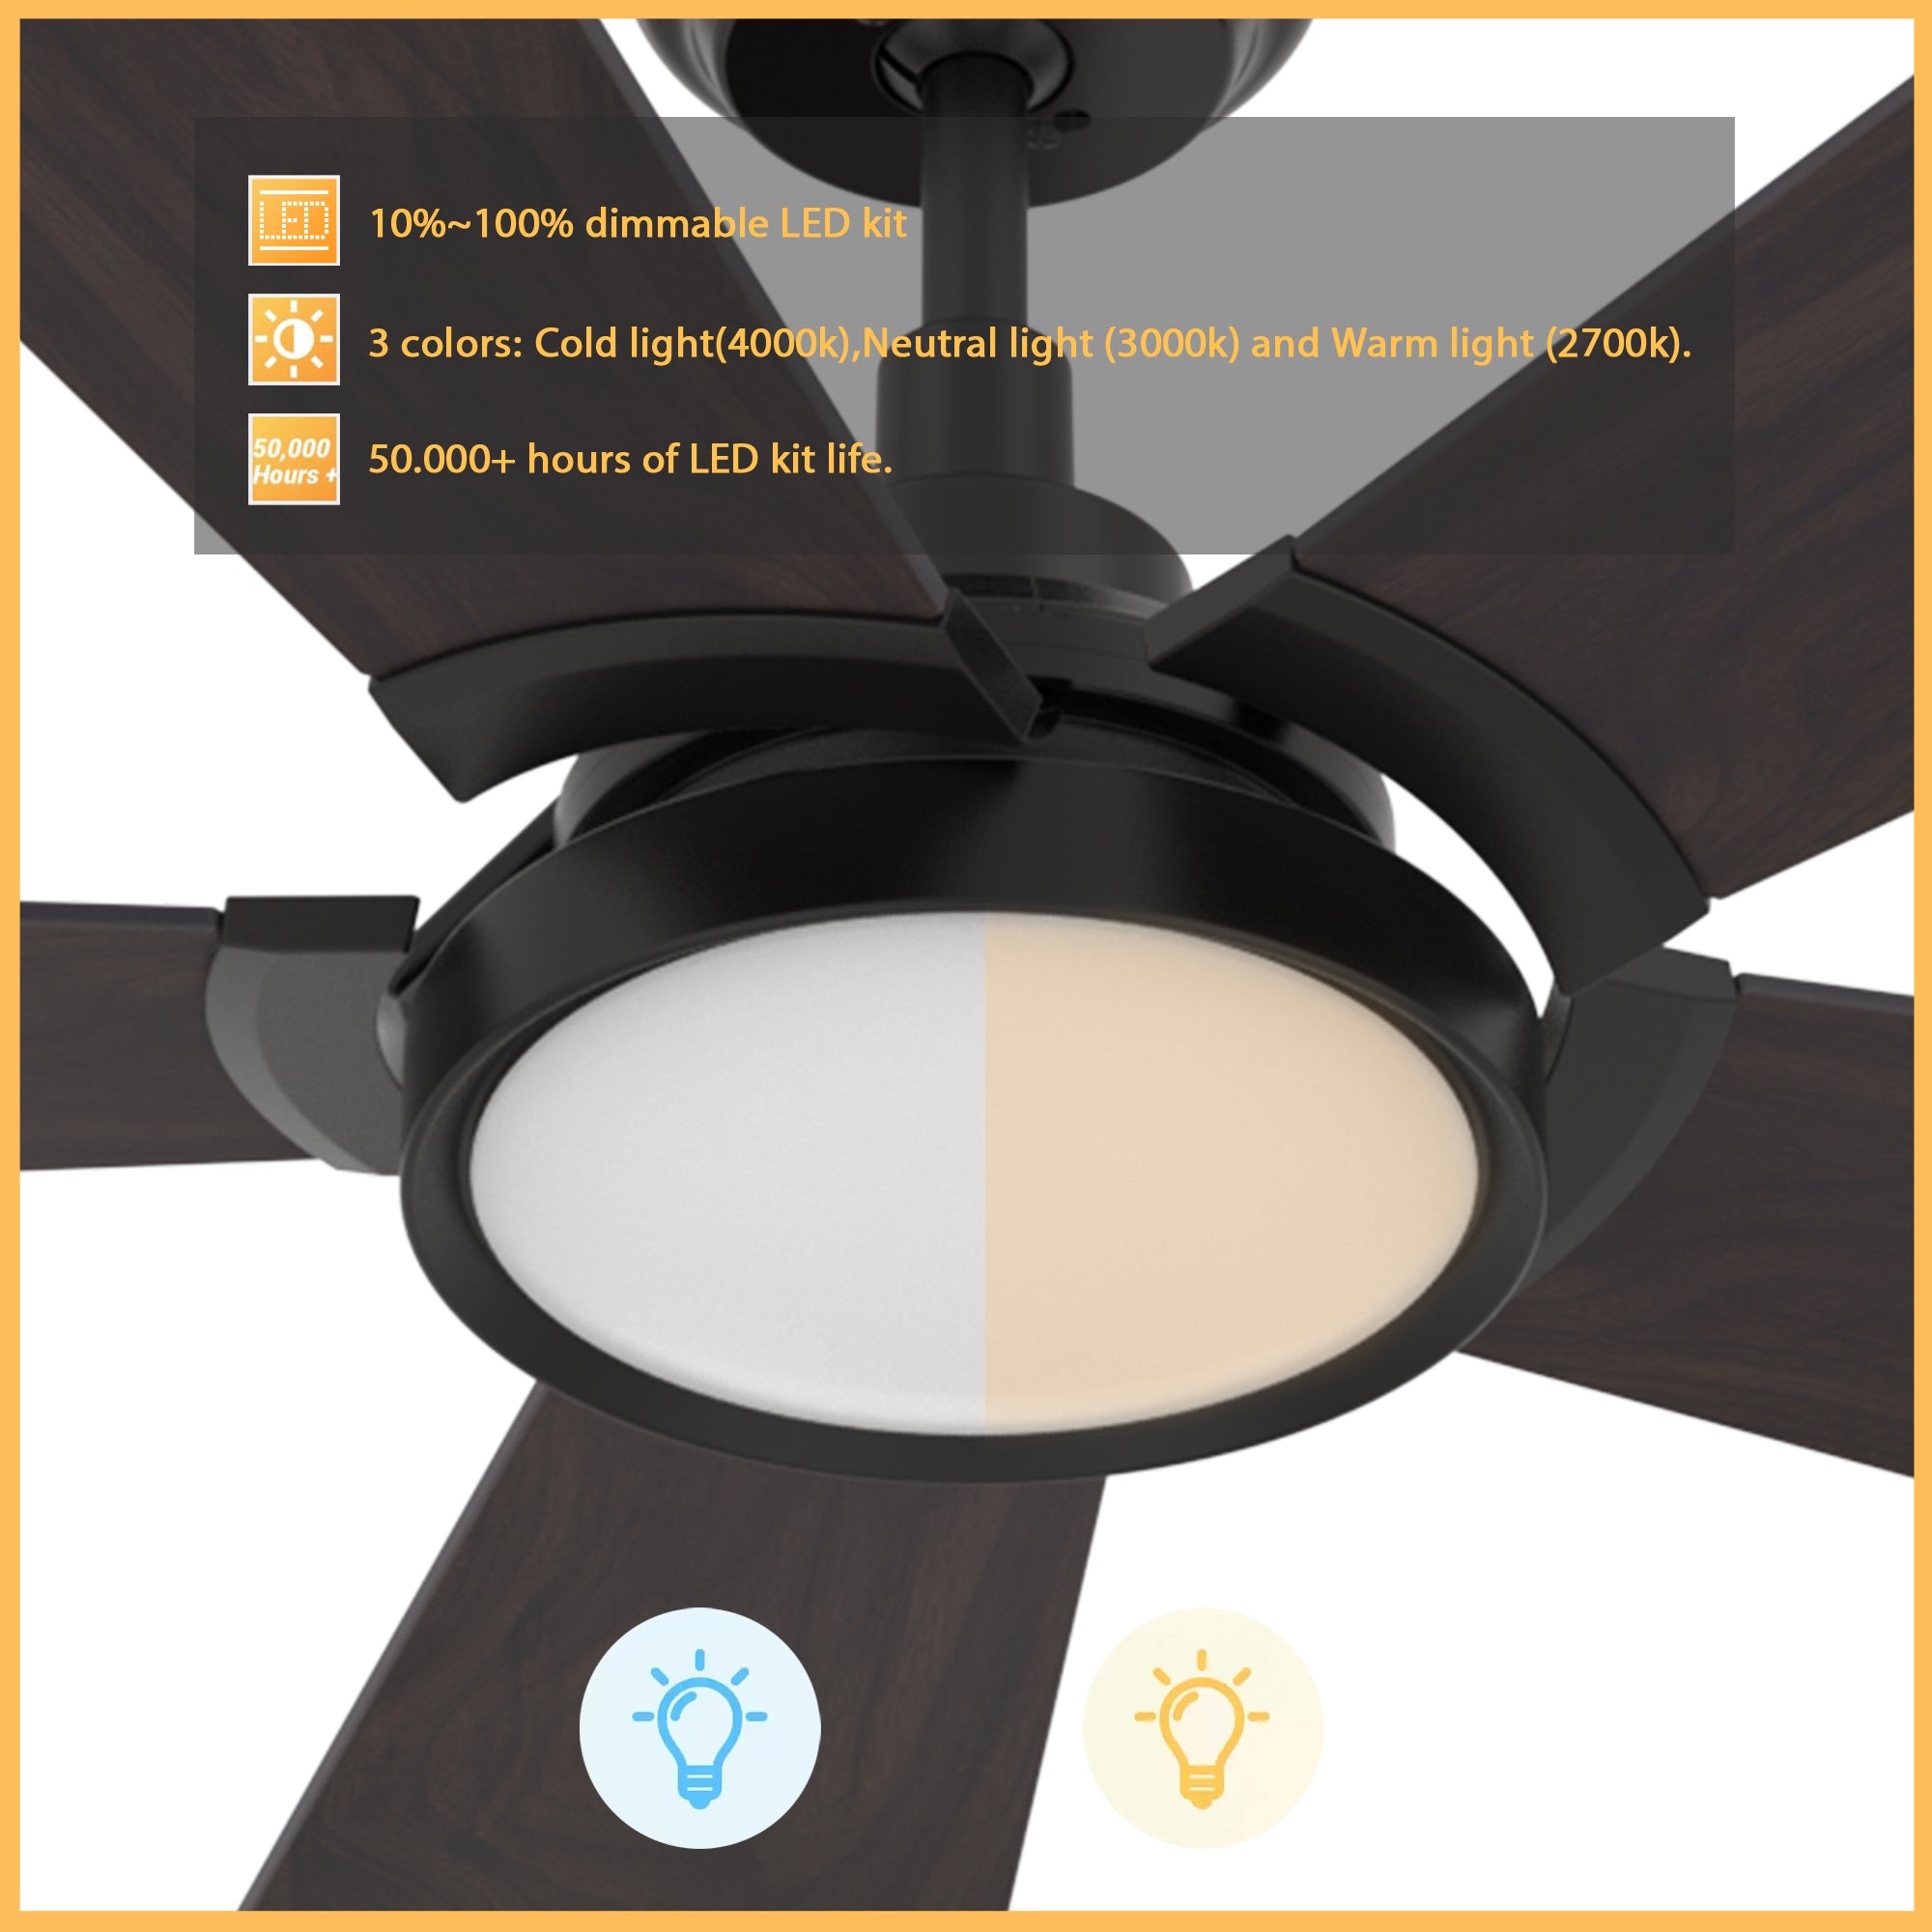 This Smafan Wilkes 52'' smart ceiling fan keeps your space cool, bright, and stylish. It is a soft modern masterpiece perfect for your large indoor living spaces. This Wifi smart ceiling fan is a simplicity designing with Black finish, use elegant Plywood blades, Glass shade and has an integrated 4000K LED daylight. The fan features Remote control, Wi-Fi apps, Siri Shortcut and Voice control technology (compatible with Amazon Alexa and Google Home Assistant ) to set fan preferences.#color_Dark-Wood